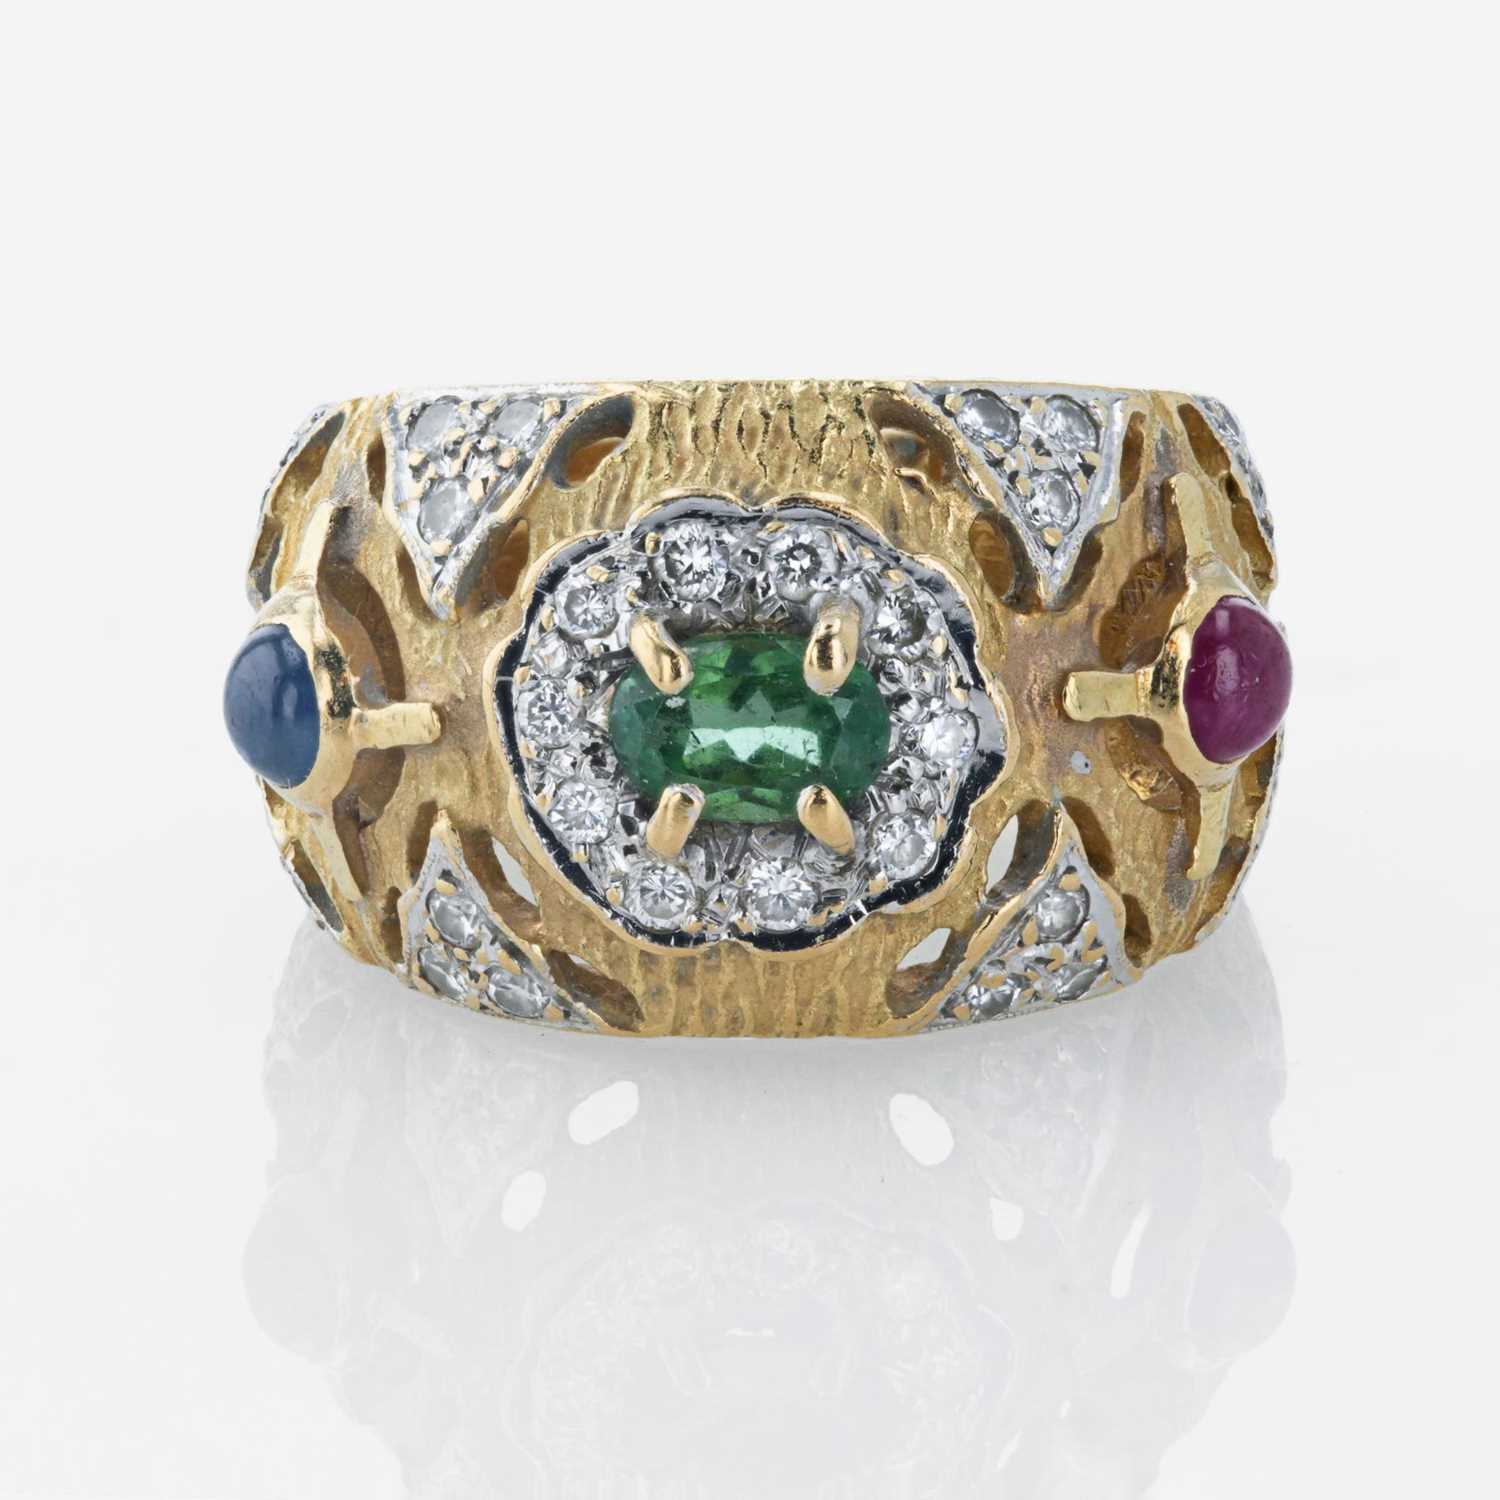 Lot 7 - An 18K, yellow gold and gemstone ring, ANF